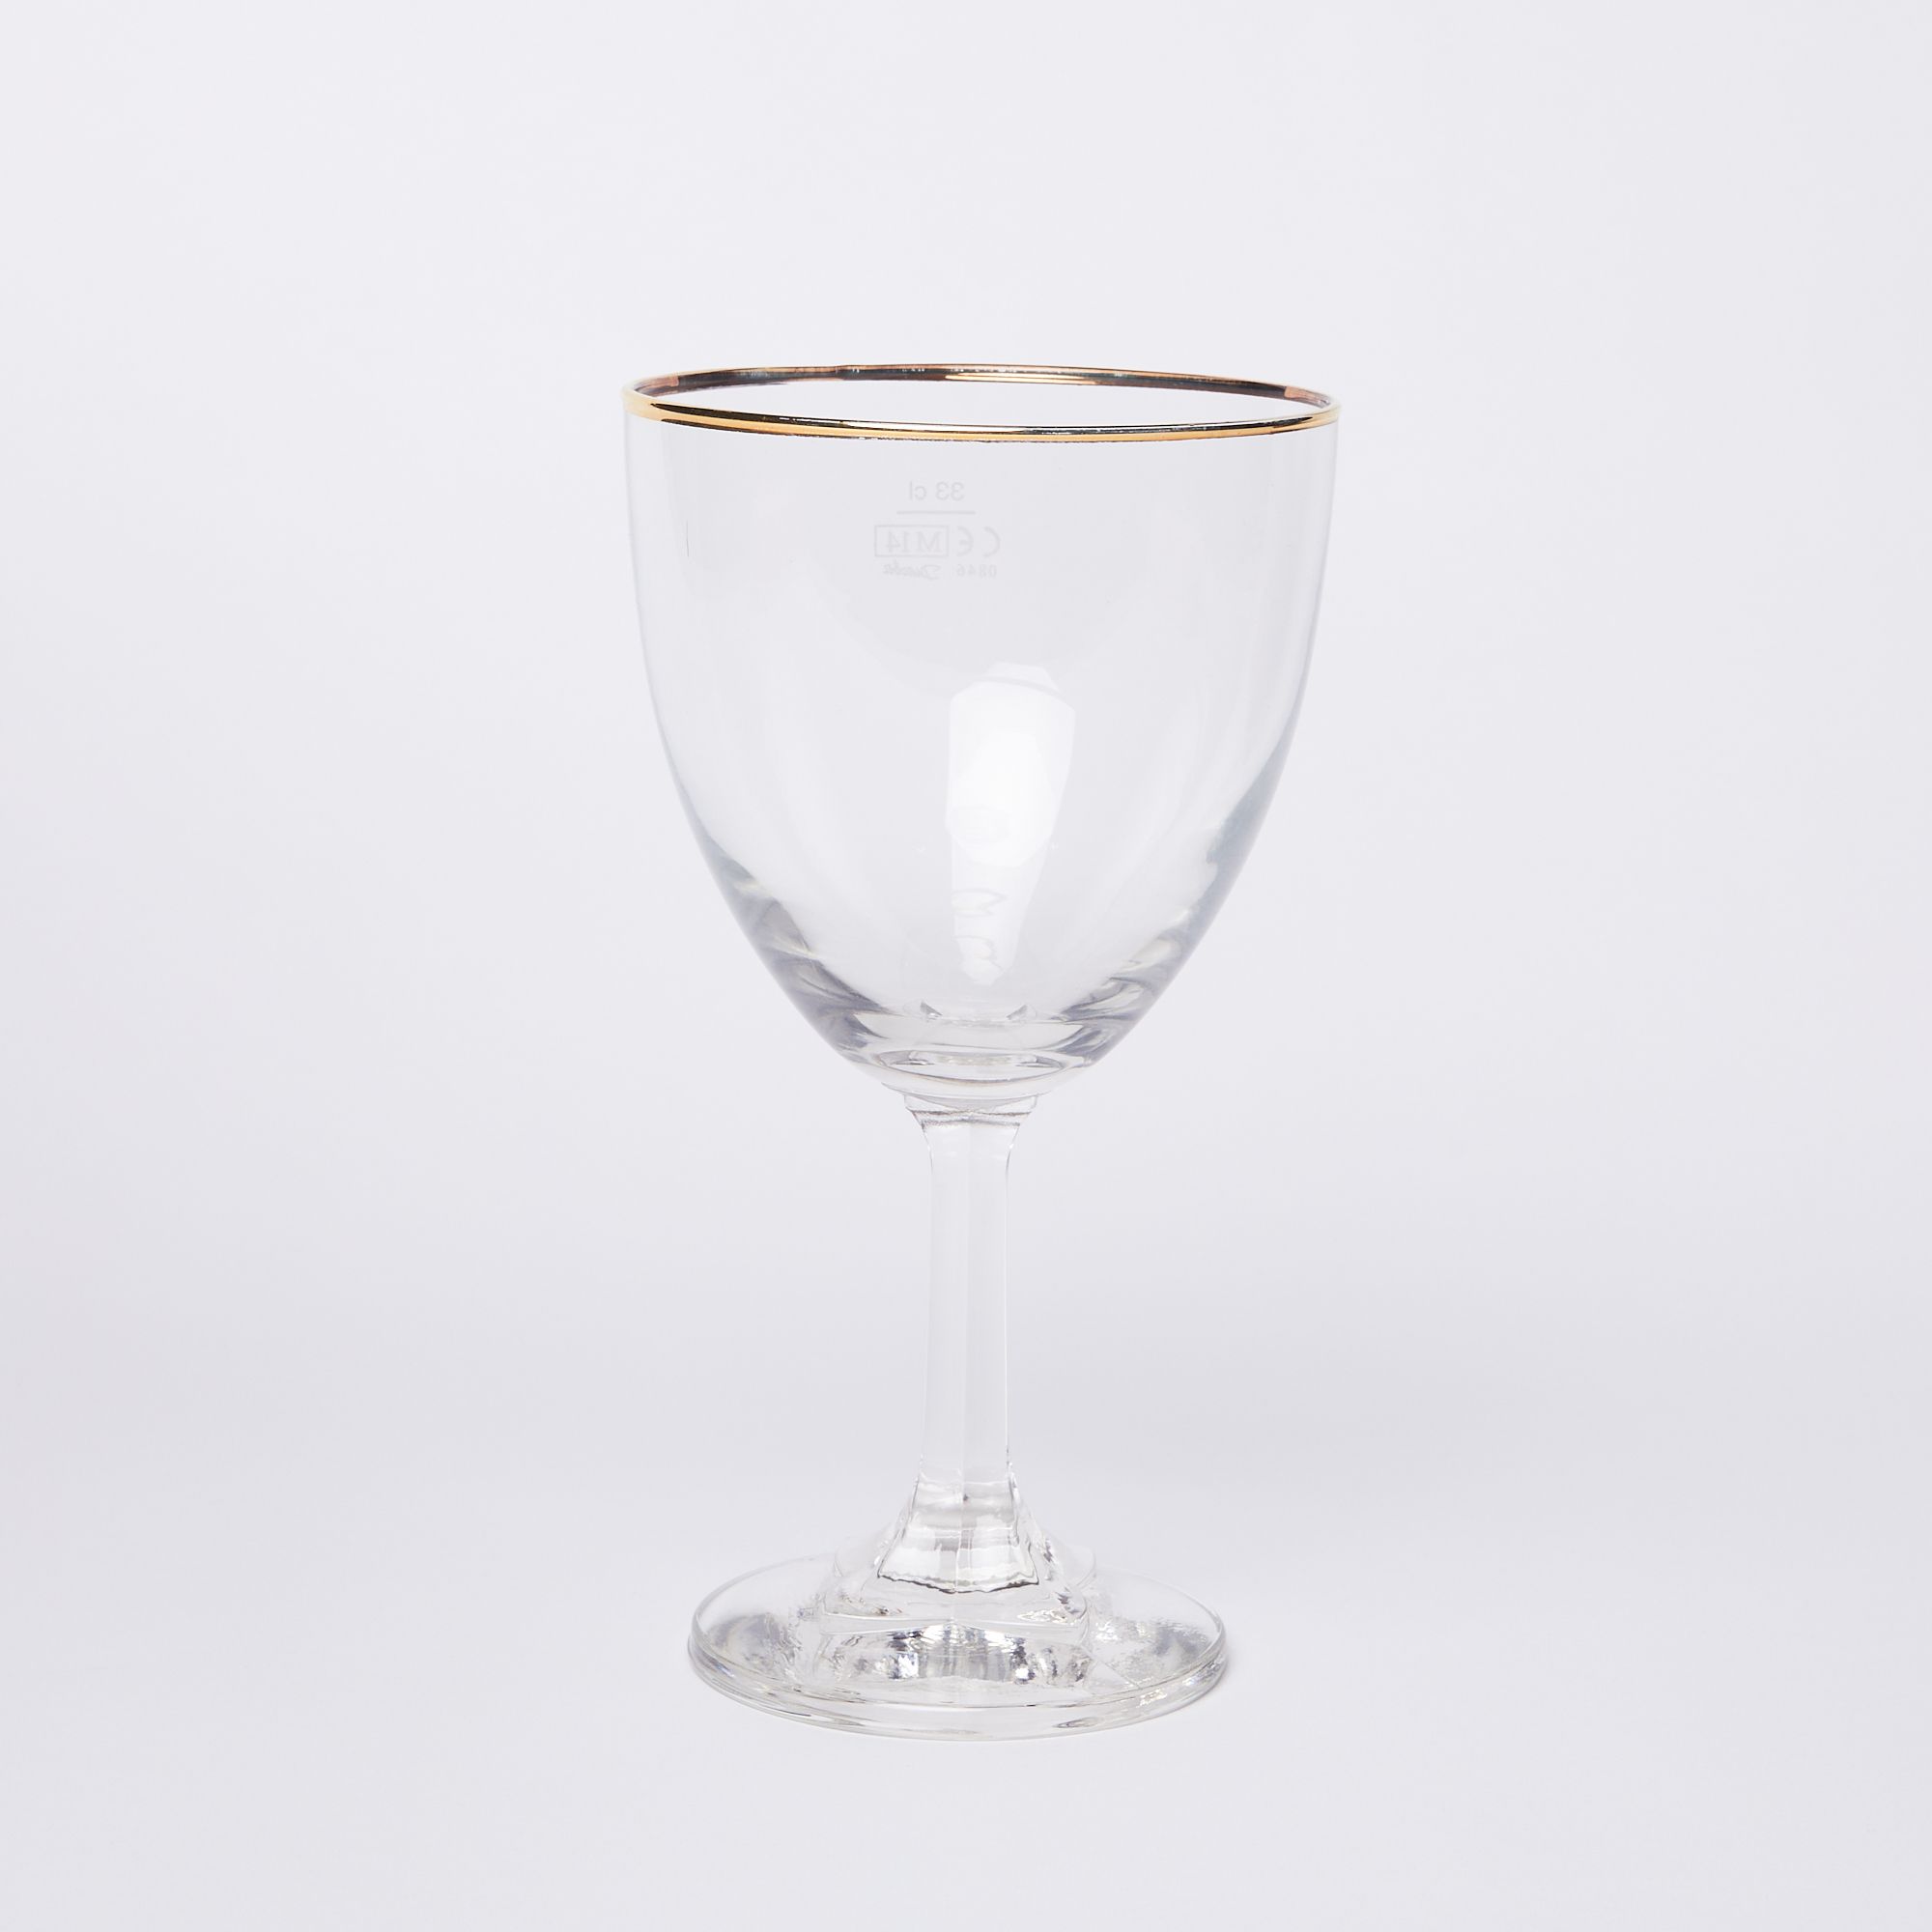 A stemmed clear beer glass with a gold rim on a white background